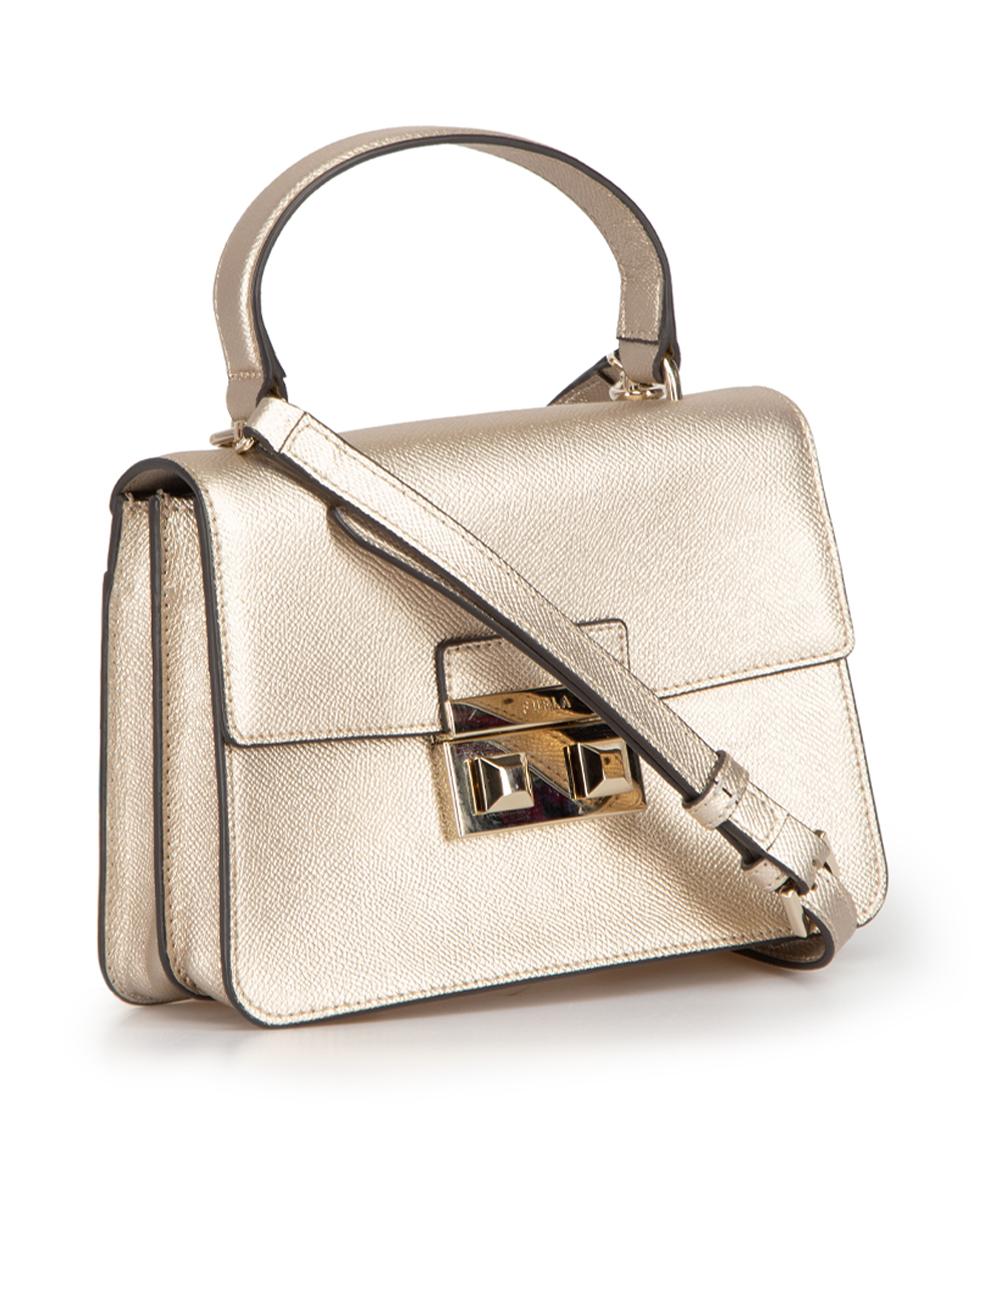 CONDITION is Very good. Hardly any visible wear to bag is evident on this used Furla designer resale item. This bag comes with original dust bag.



Details


Beige metallic

Leather

Small top handle bag

Gold tone hardware

1x Top handle

1x